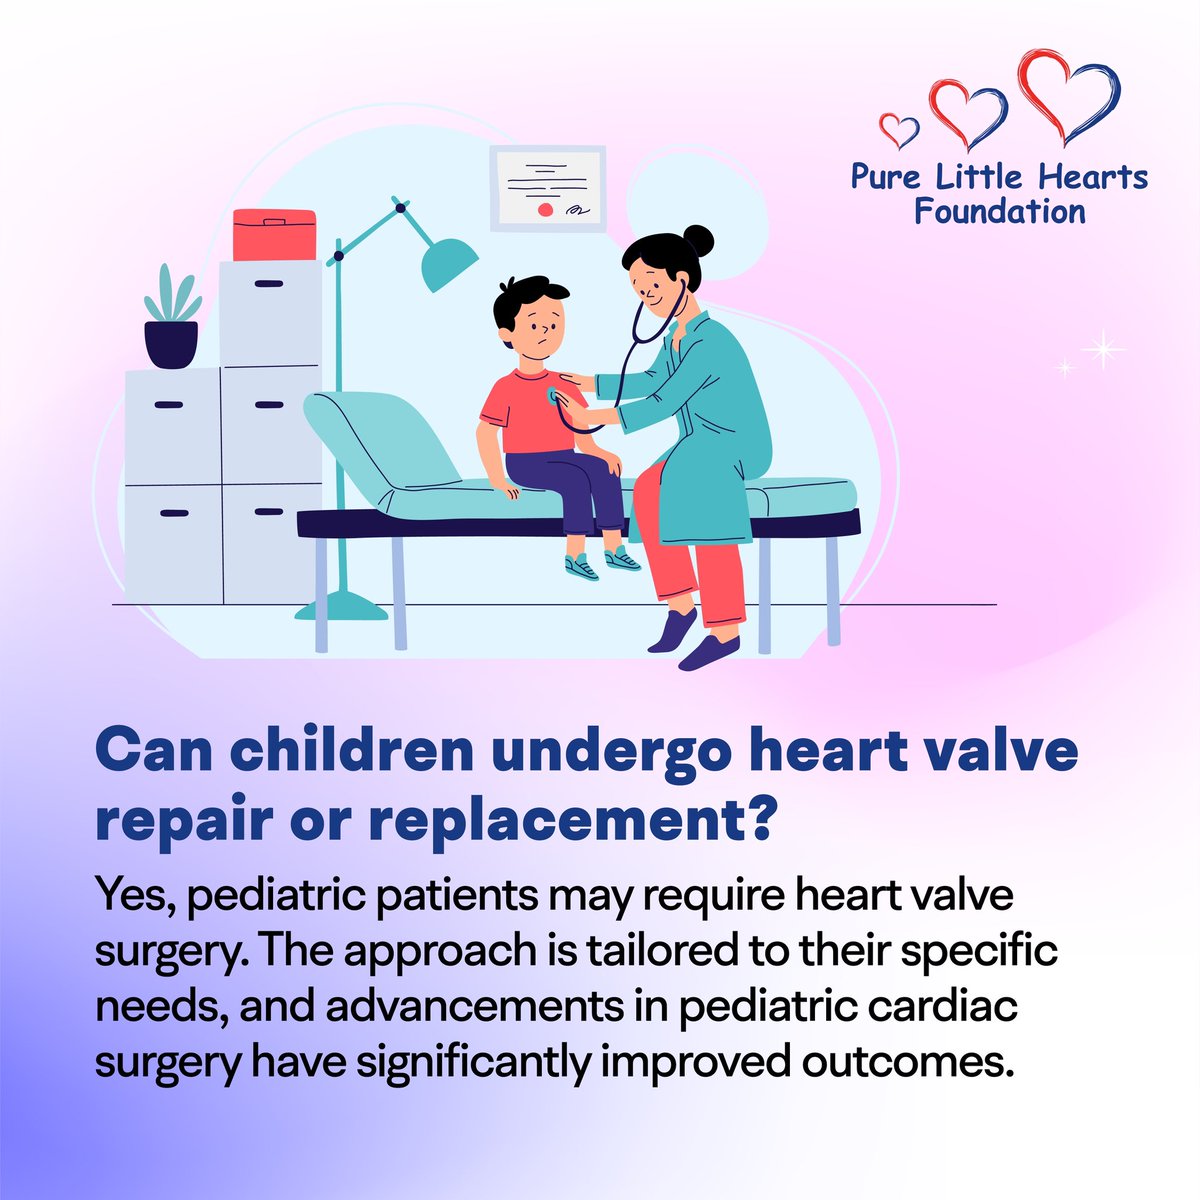 Discover the intricacies of heart valve repair and replacement. Explore advanced medical insights into these transformative procedures that enhance cardiac health. Stay informed for a healthier heart.

#PureLittleHeartsFoundation #HealthyHearts